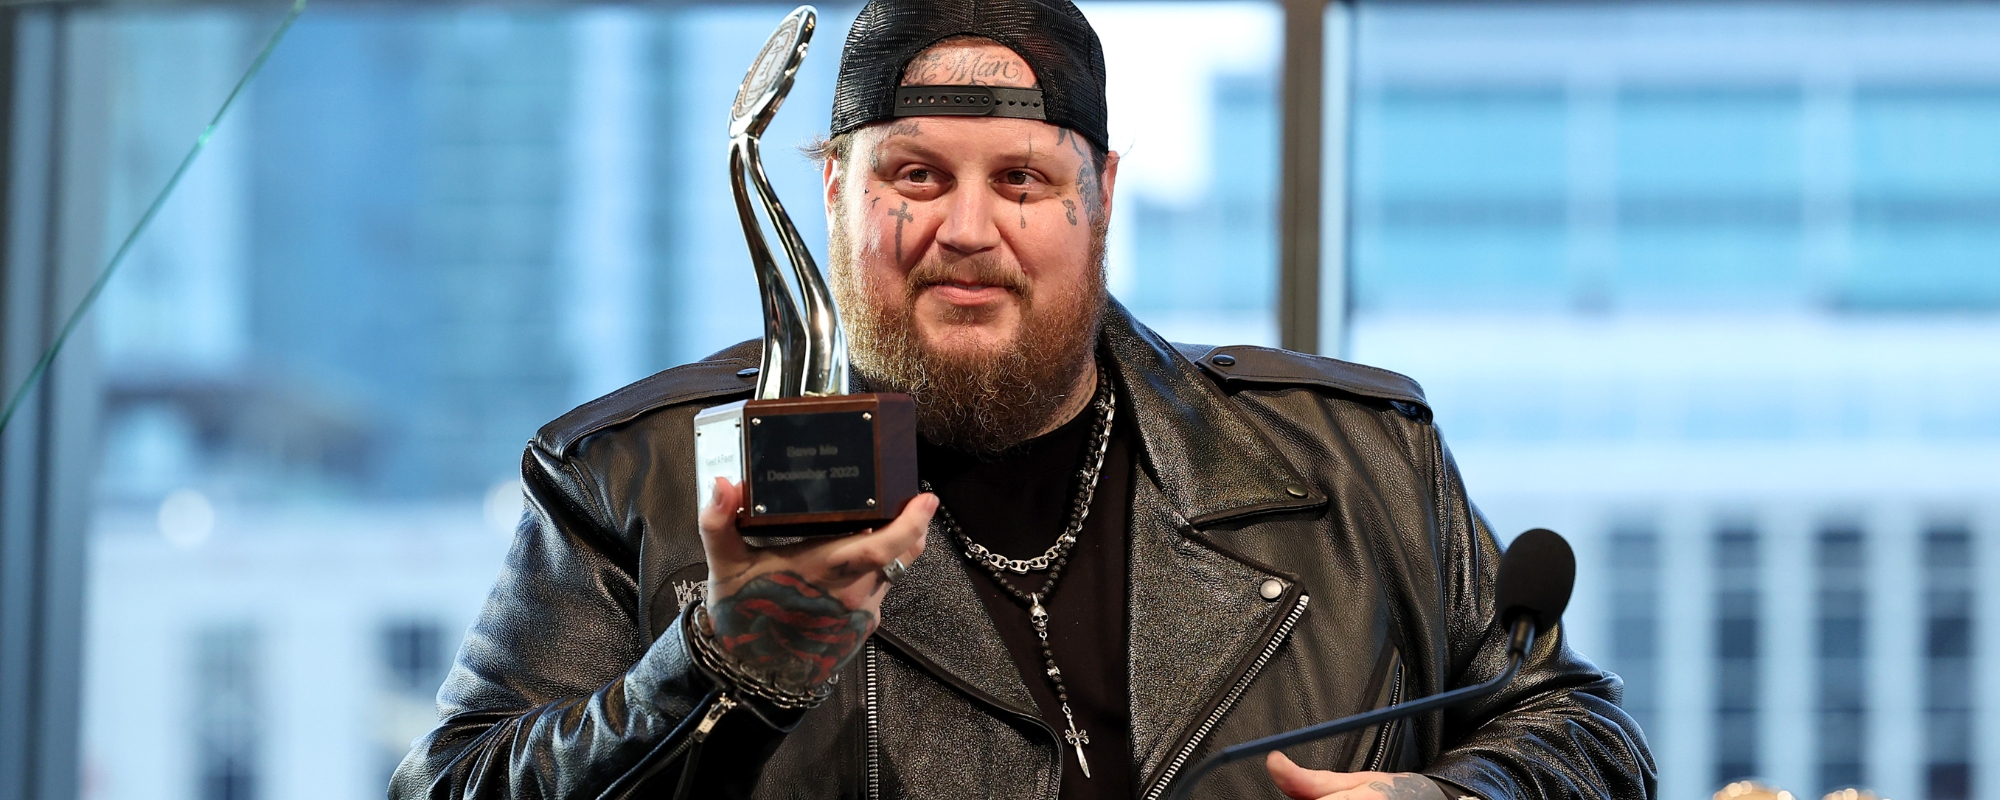 3 of Jelly Roll’s Most Unforgettable Acceptance Speeches